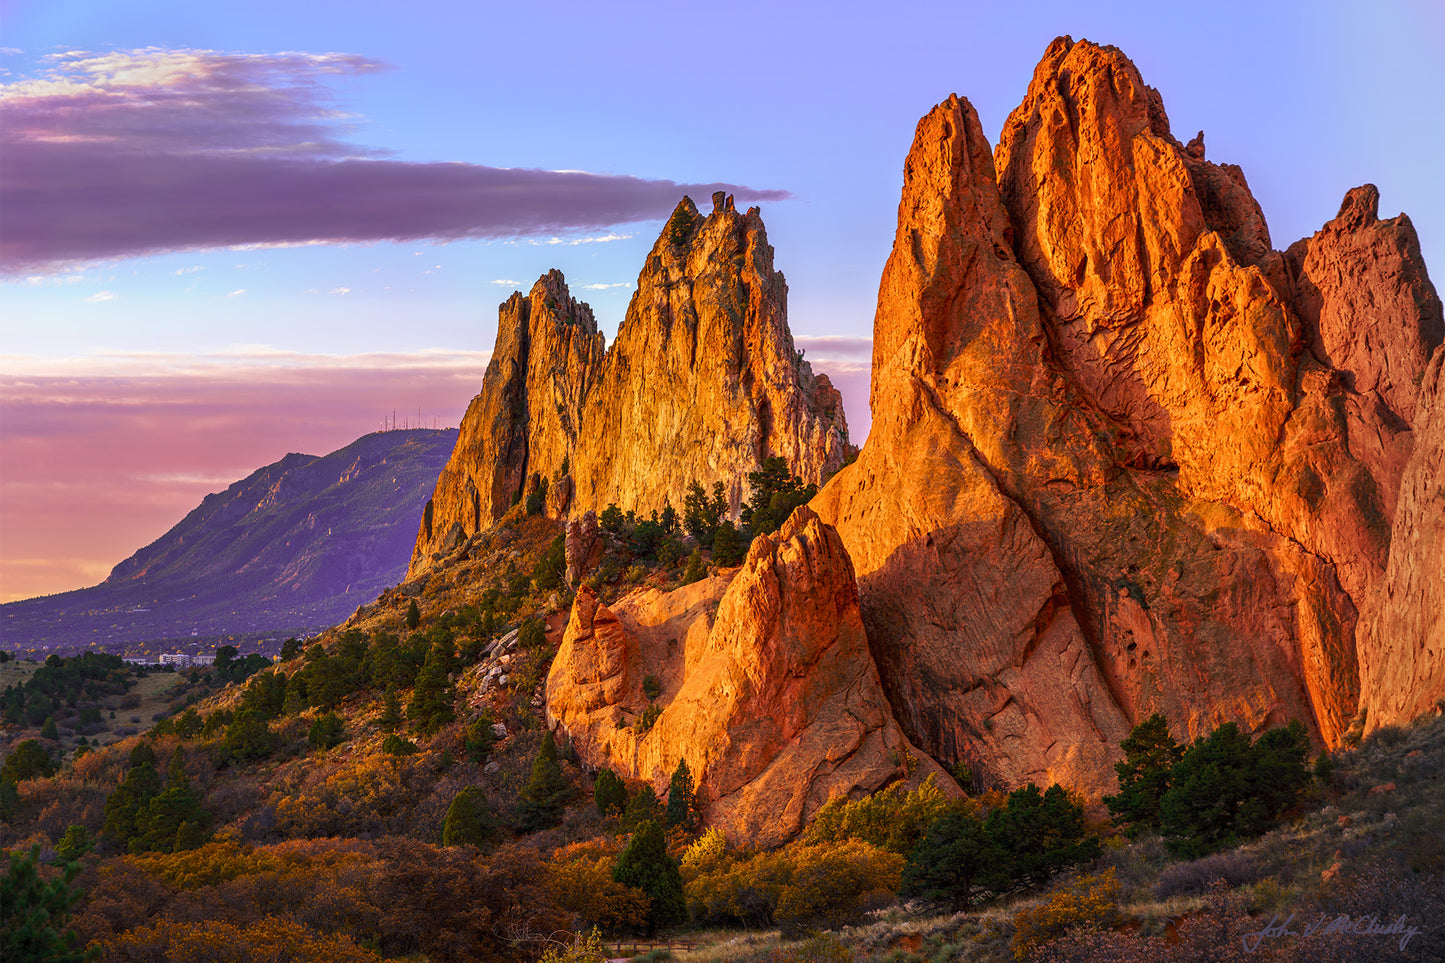 The sandstone cliffs at the Garden of the Gods Colorado glow in the orange light of the rising sun.  Fine art landscape photo by McClusky Nature Photography.